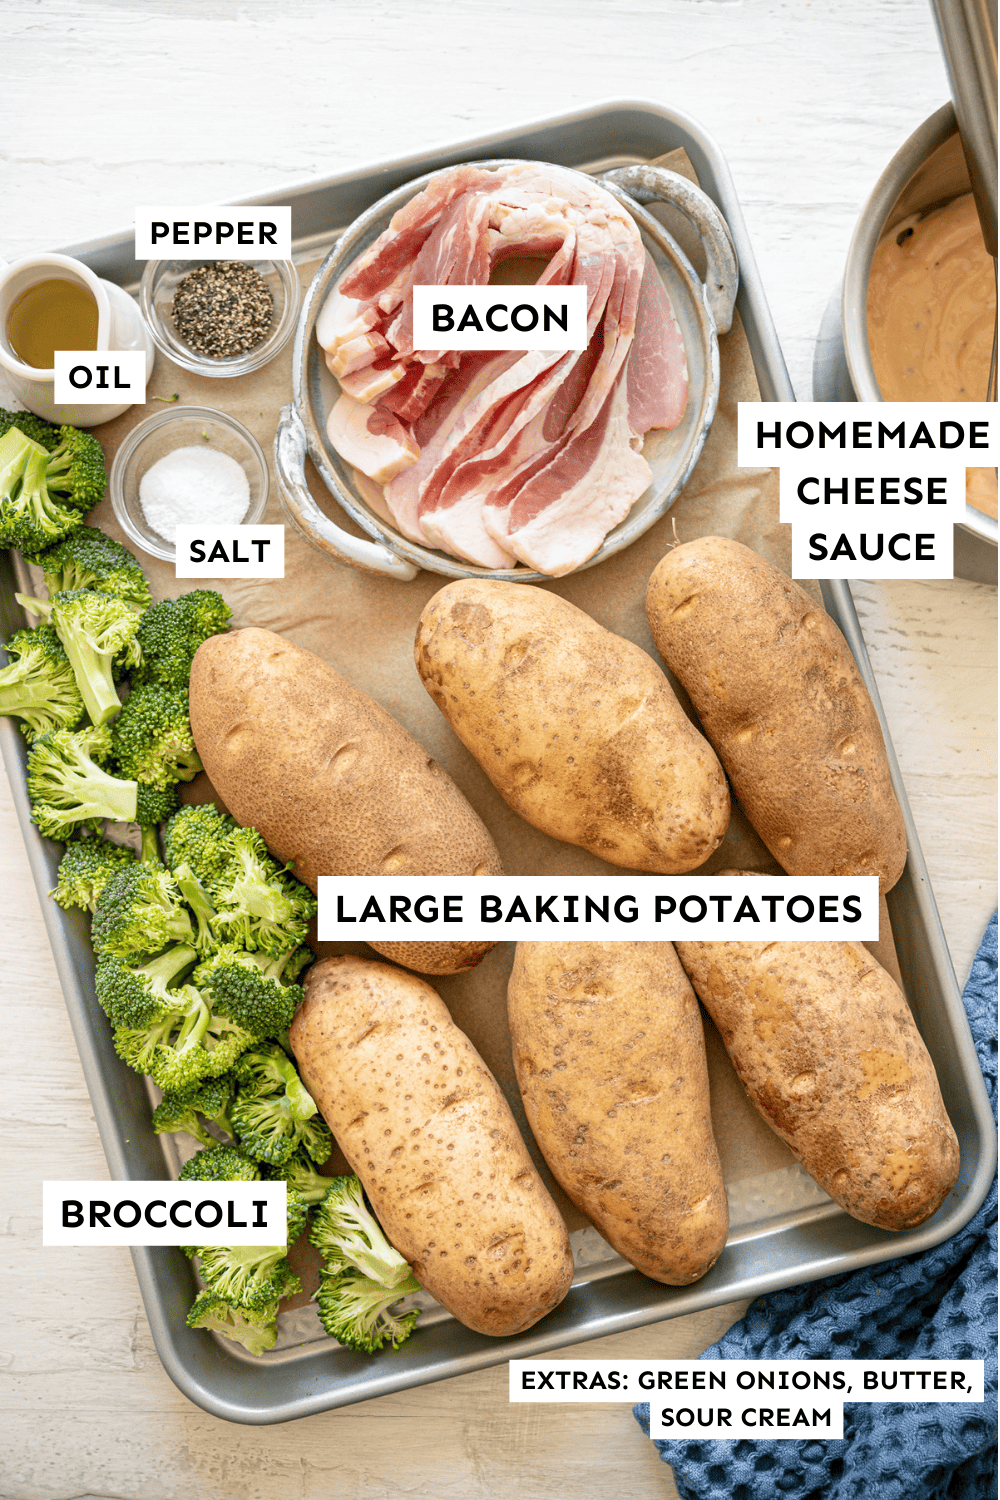 Baked potato bar ingredients laid out on a baking sheet and labeled.